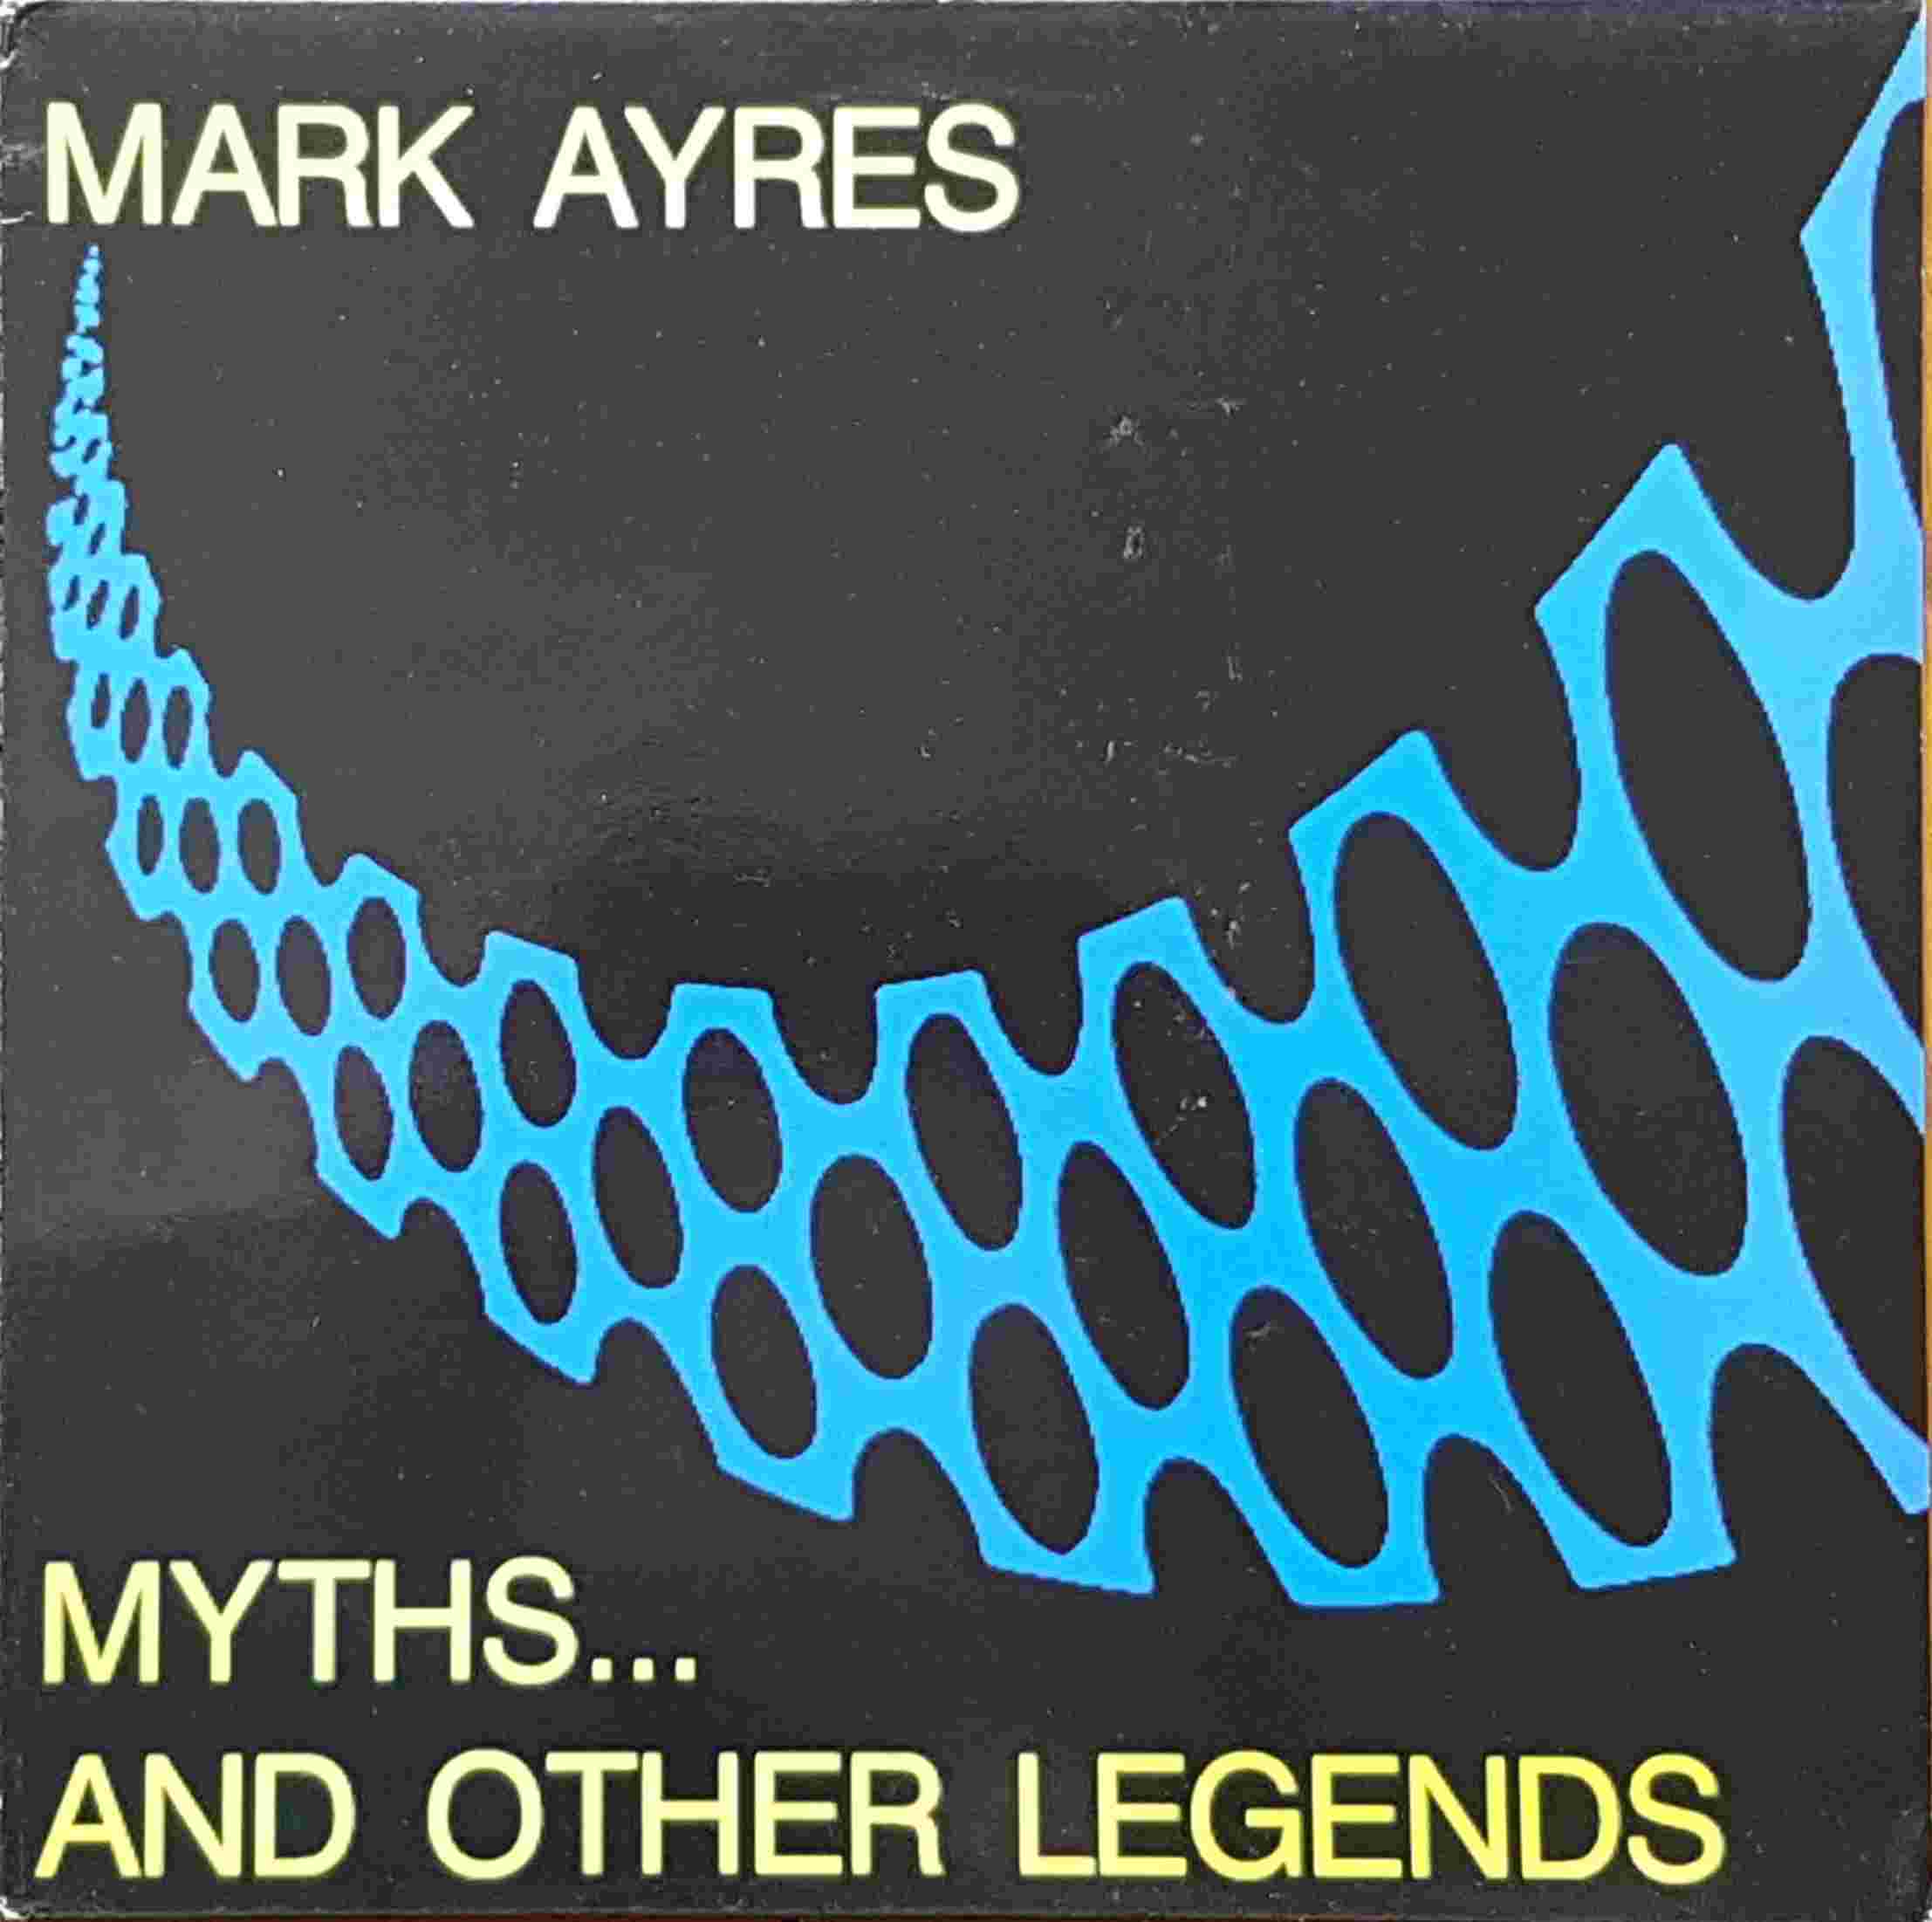 Picture of METRO 3 Myths ... And other legends by artist Mark Ayres from the BBC albums - Records and Tapes library